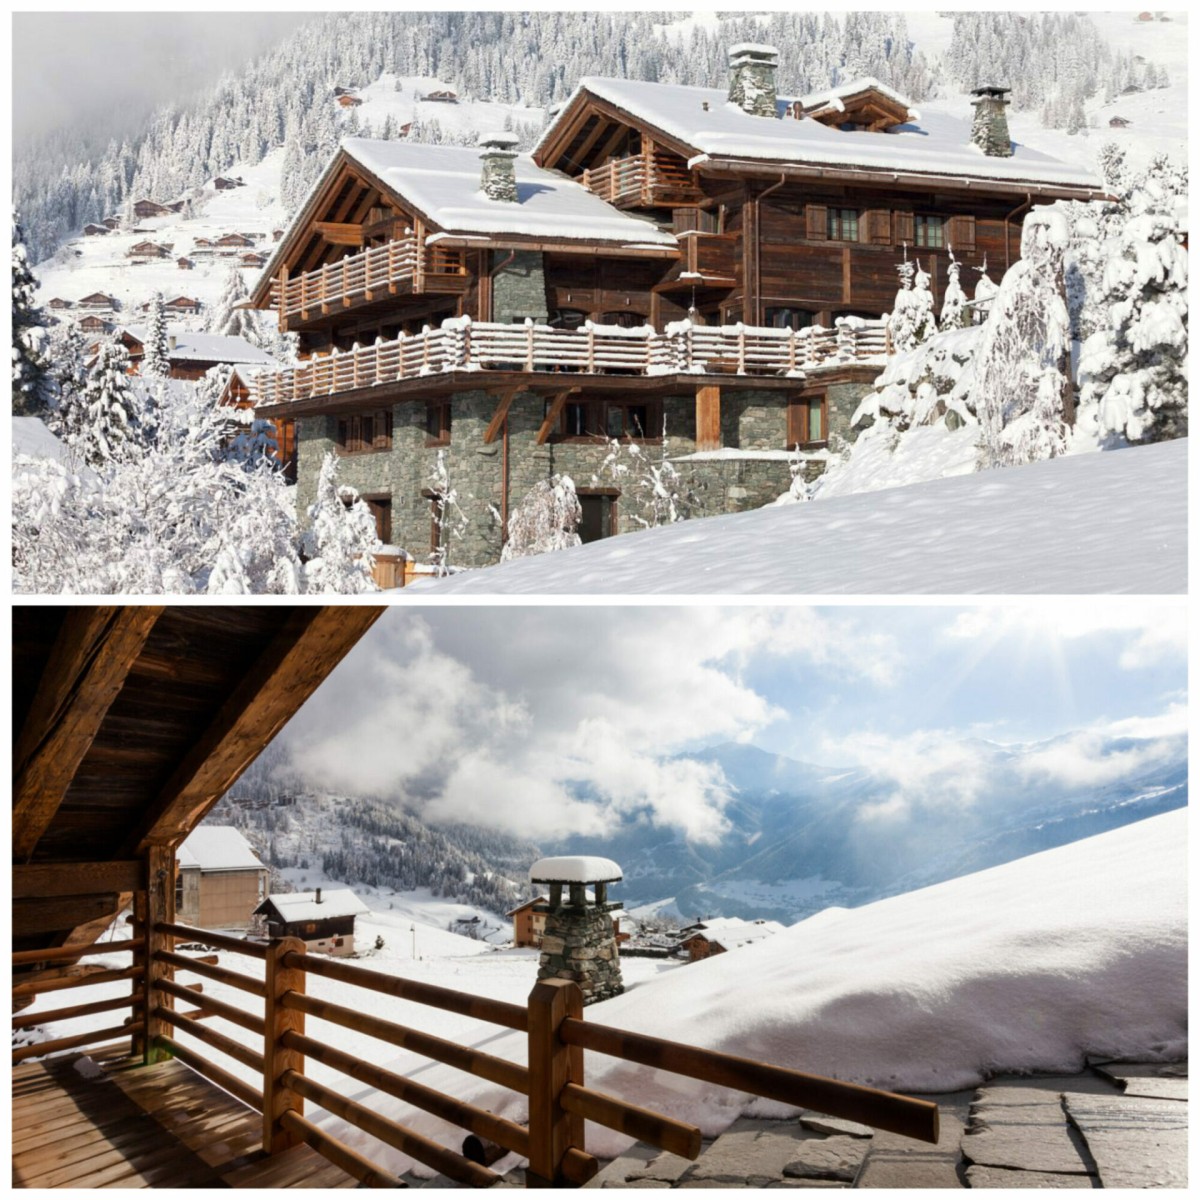 Chalet 1936, perched on the Verbier plateau, is as breathtaking as the immense mountain scapes it is nestled within